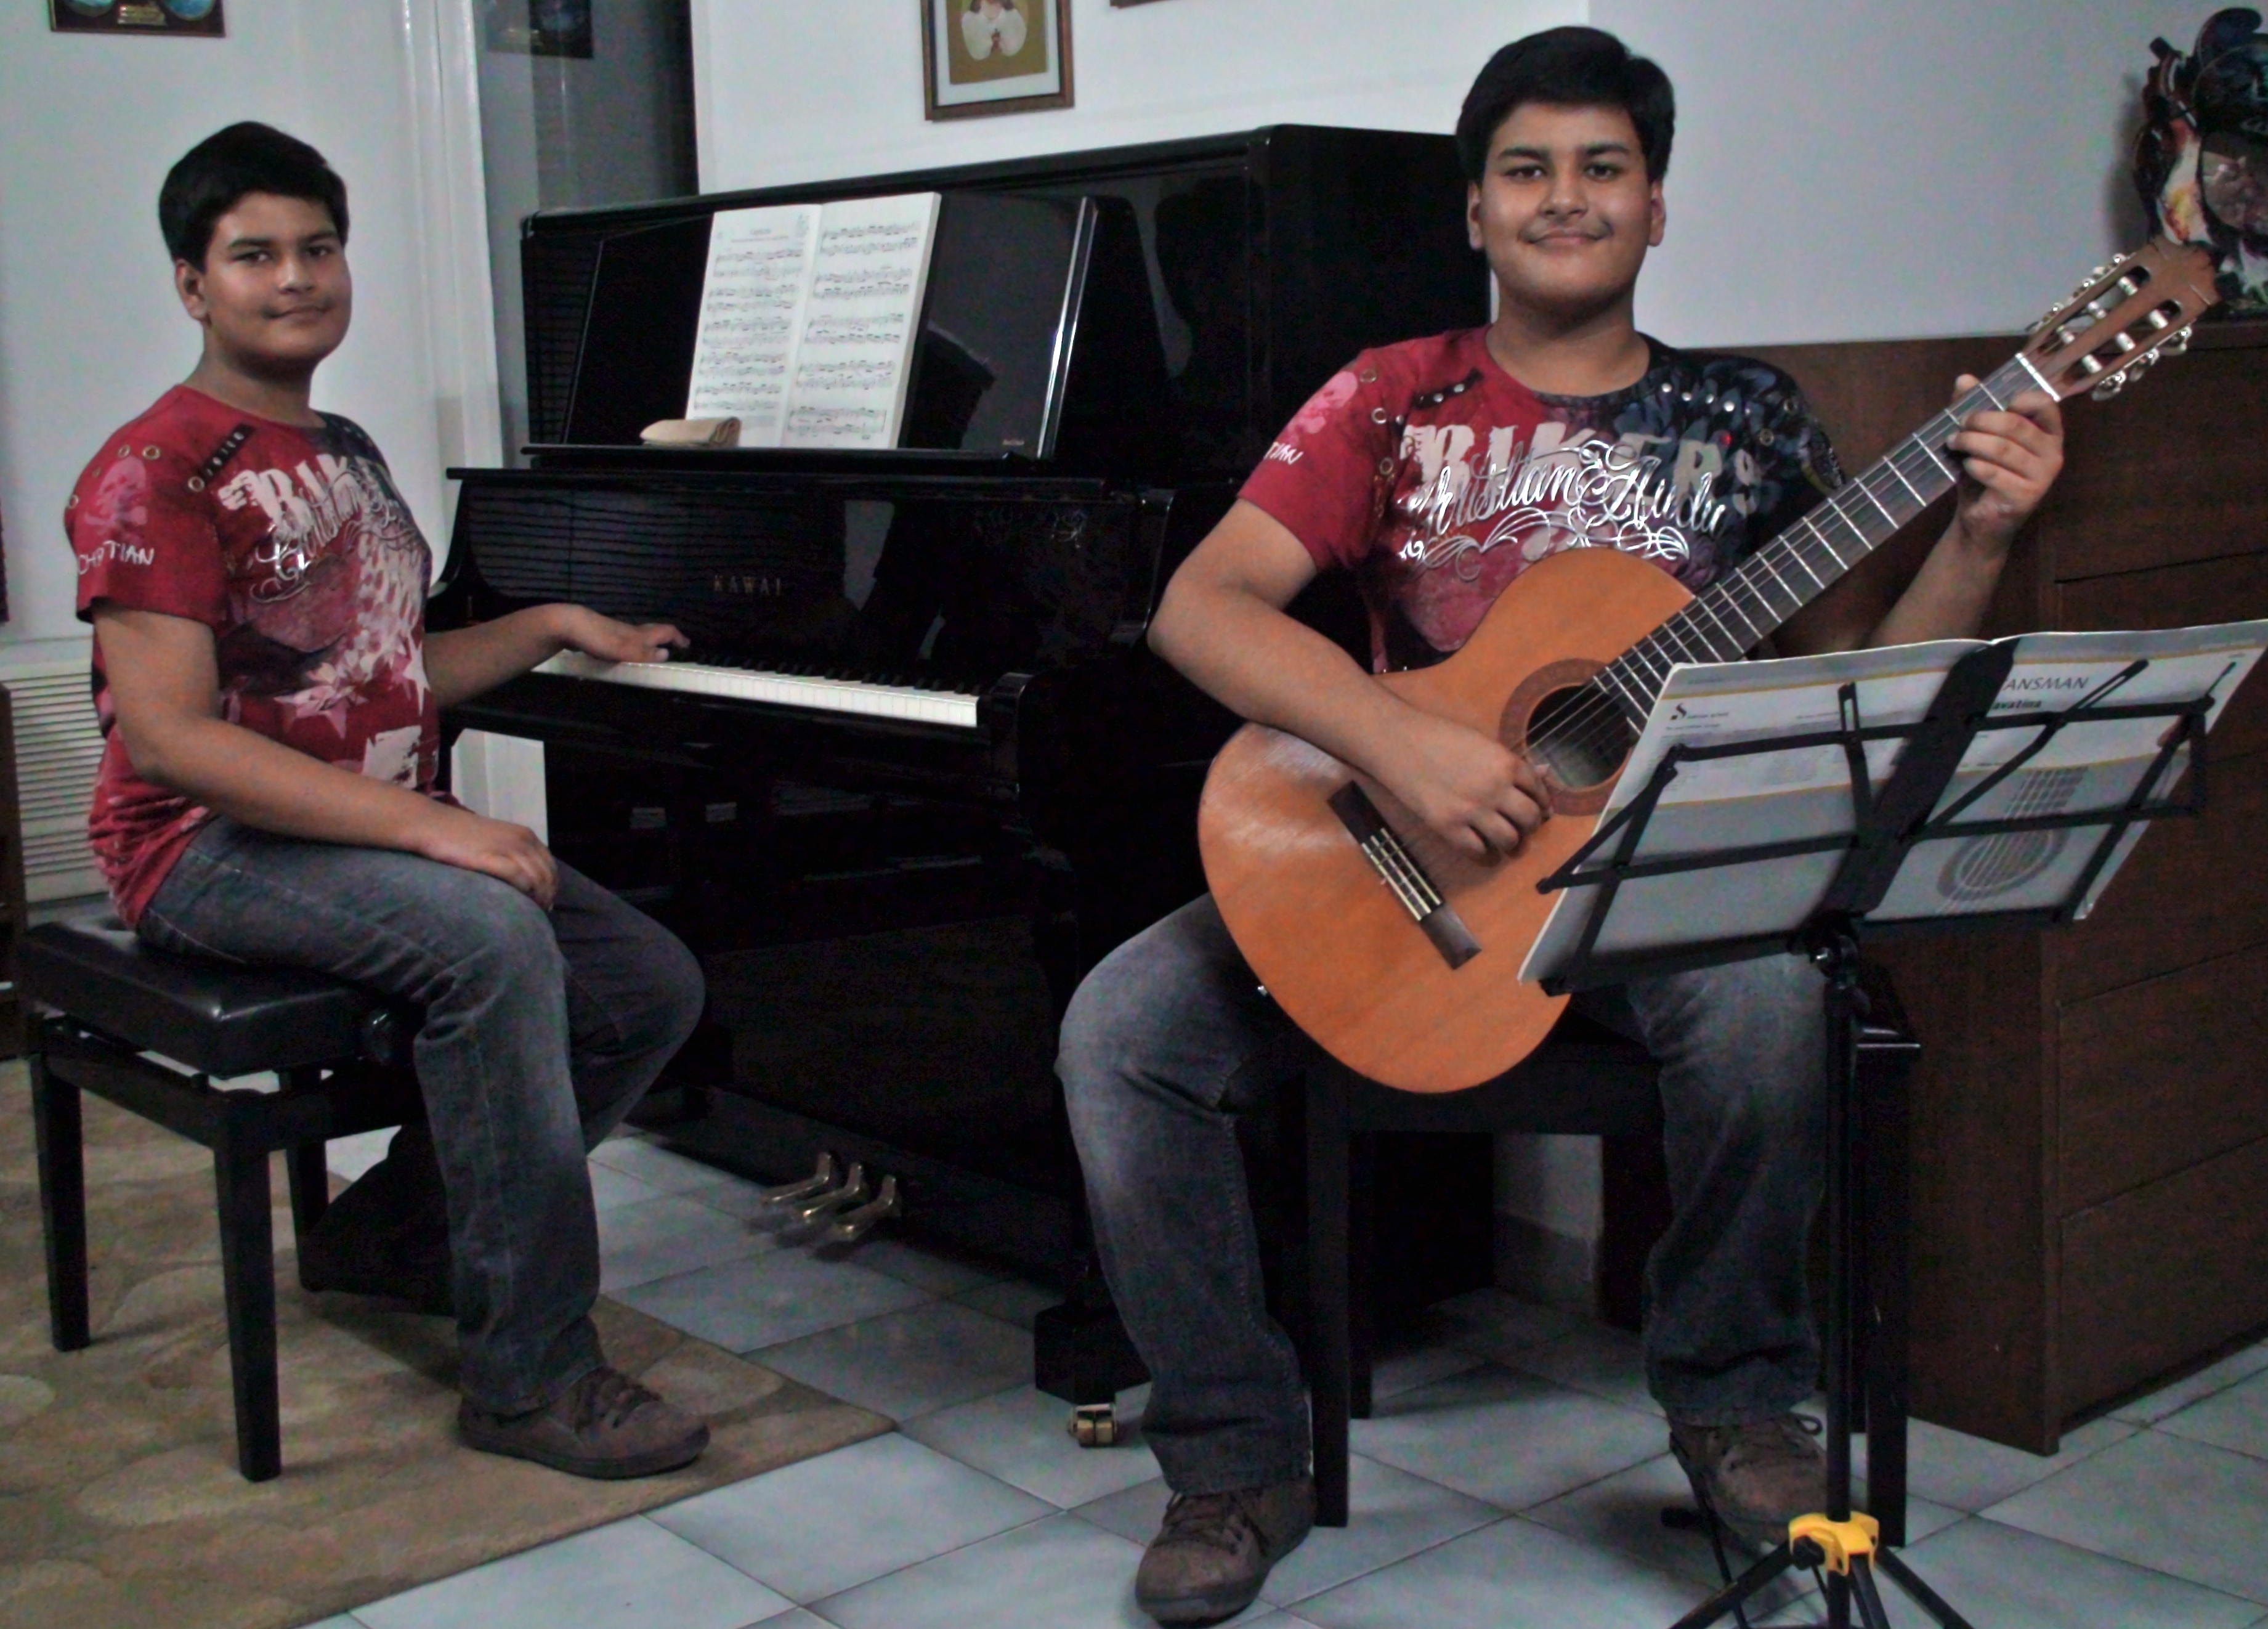 YOUNGEST TWIN BROTHERS TO PERFORM WESTERN CLASSICAL MUSIC